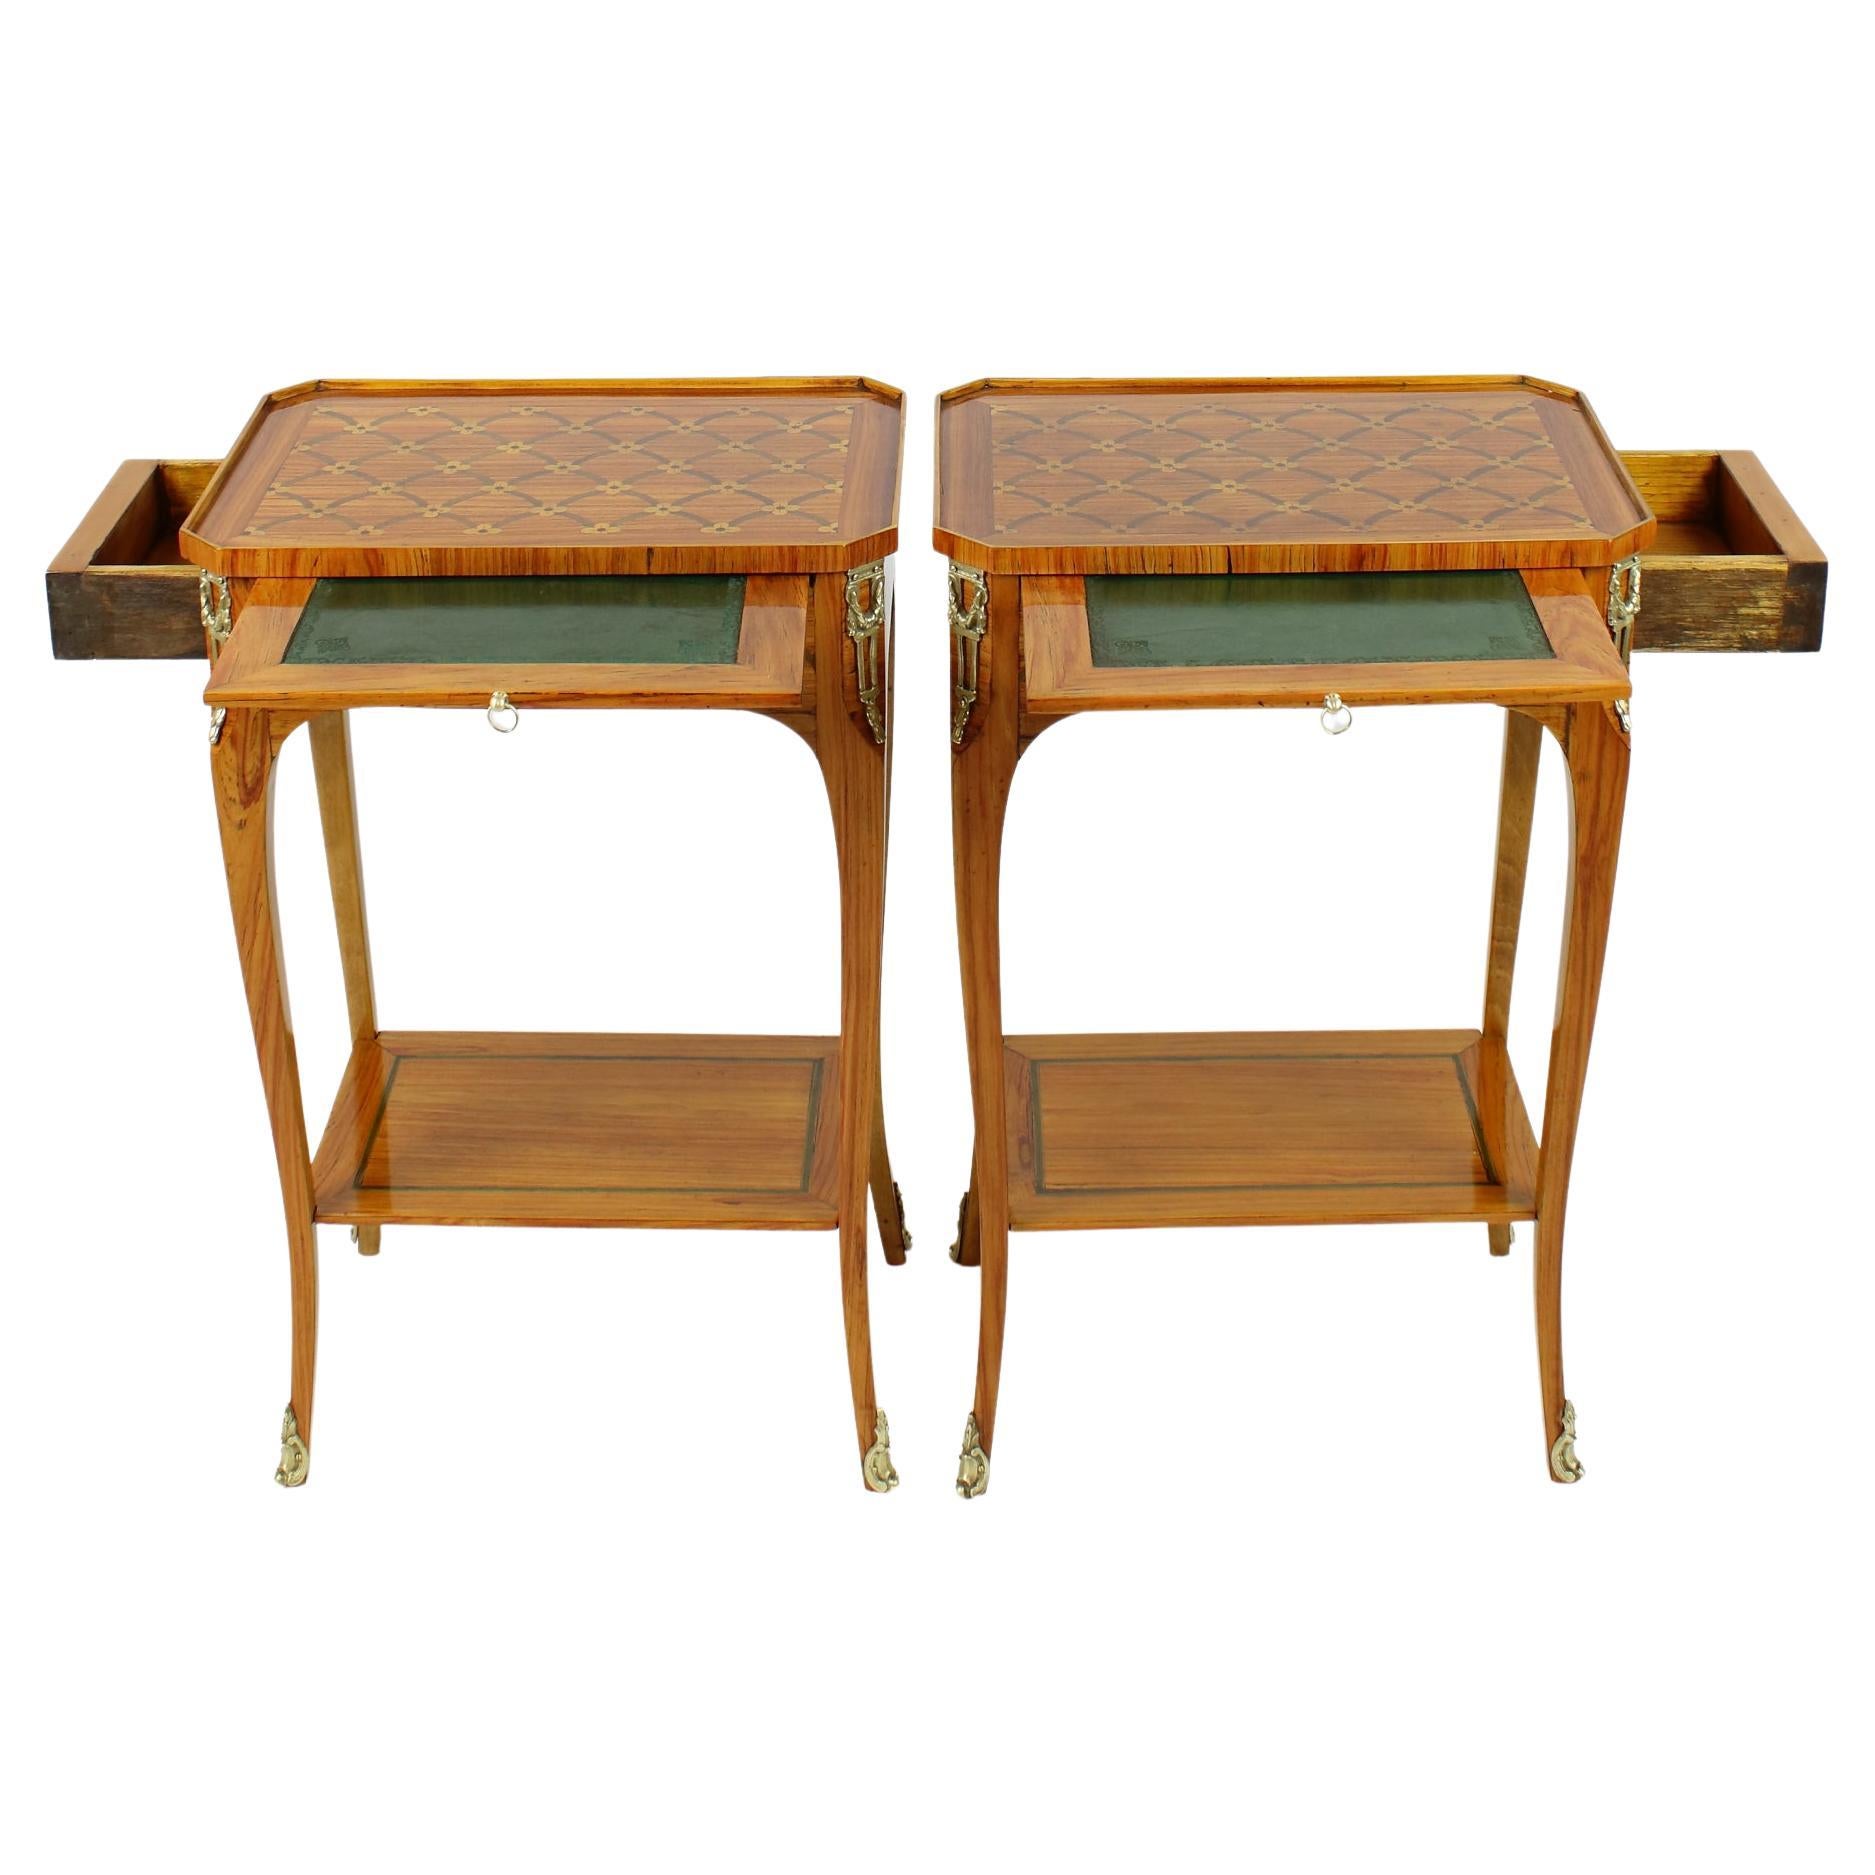 Pair of 19th/20th century Louis XV Marquetry side tables or lady's writing tables

Small Louis XVI style marquetry side tables or lady's writing tables, manufactured in France at the end of 19th/beginning of 20th century; on four cabriole legs